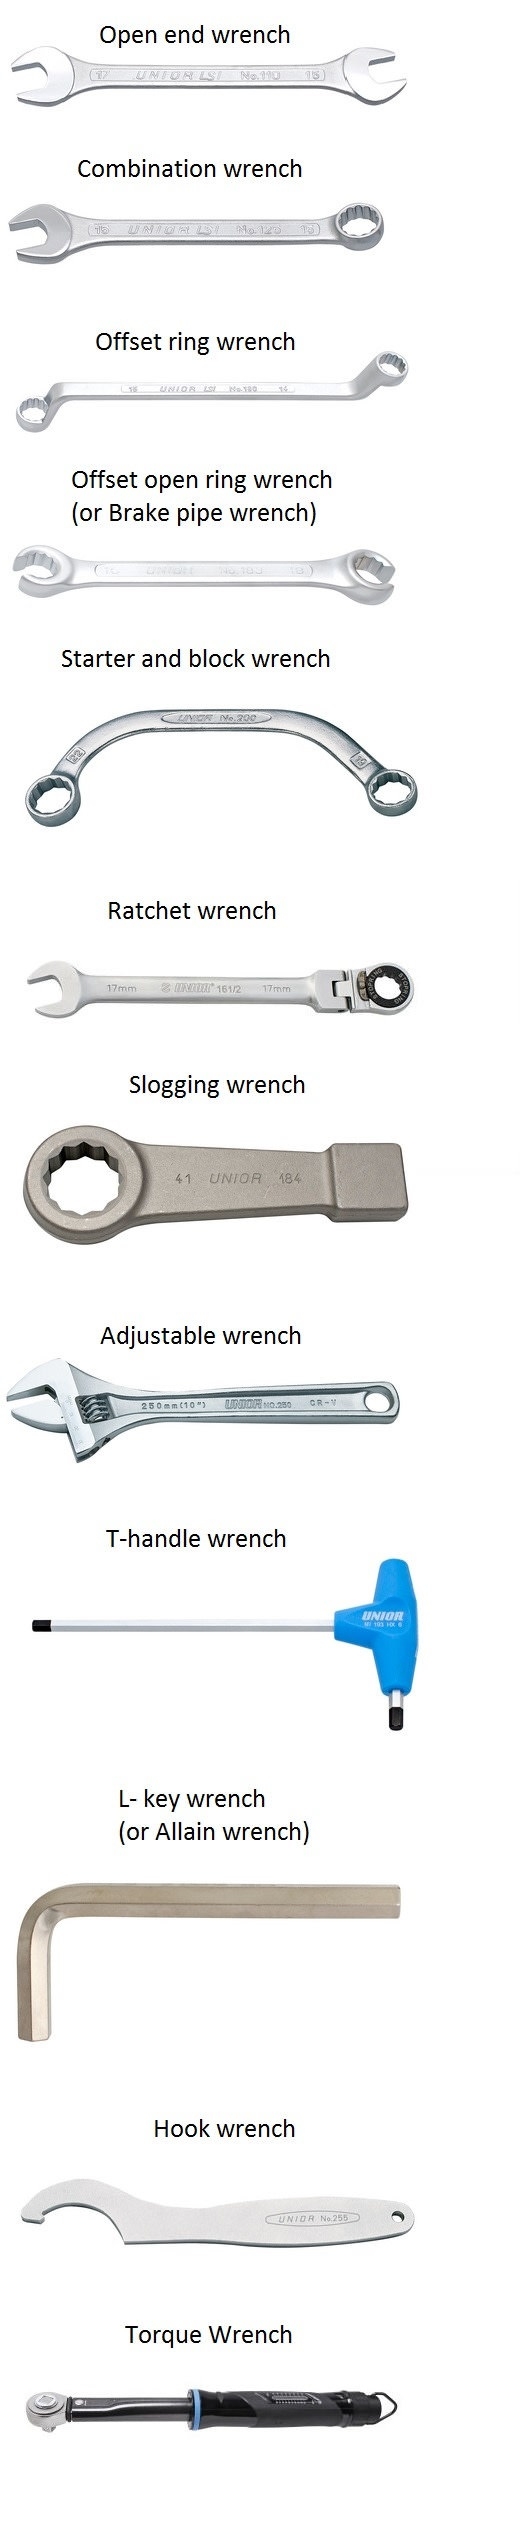 Family of wrenches